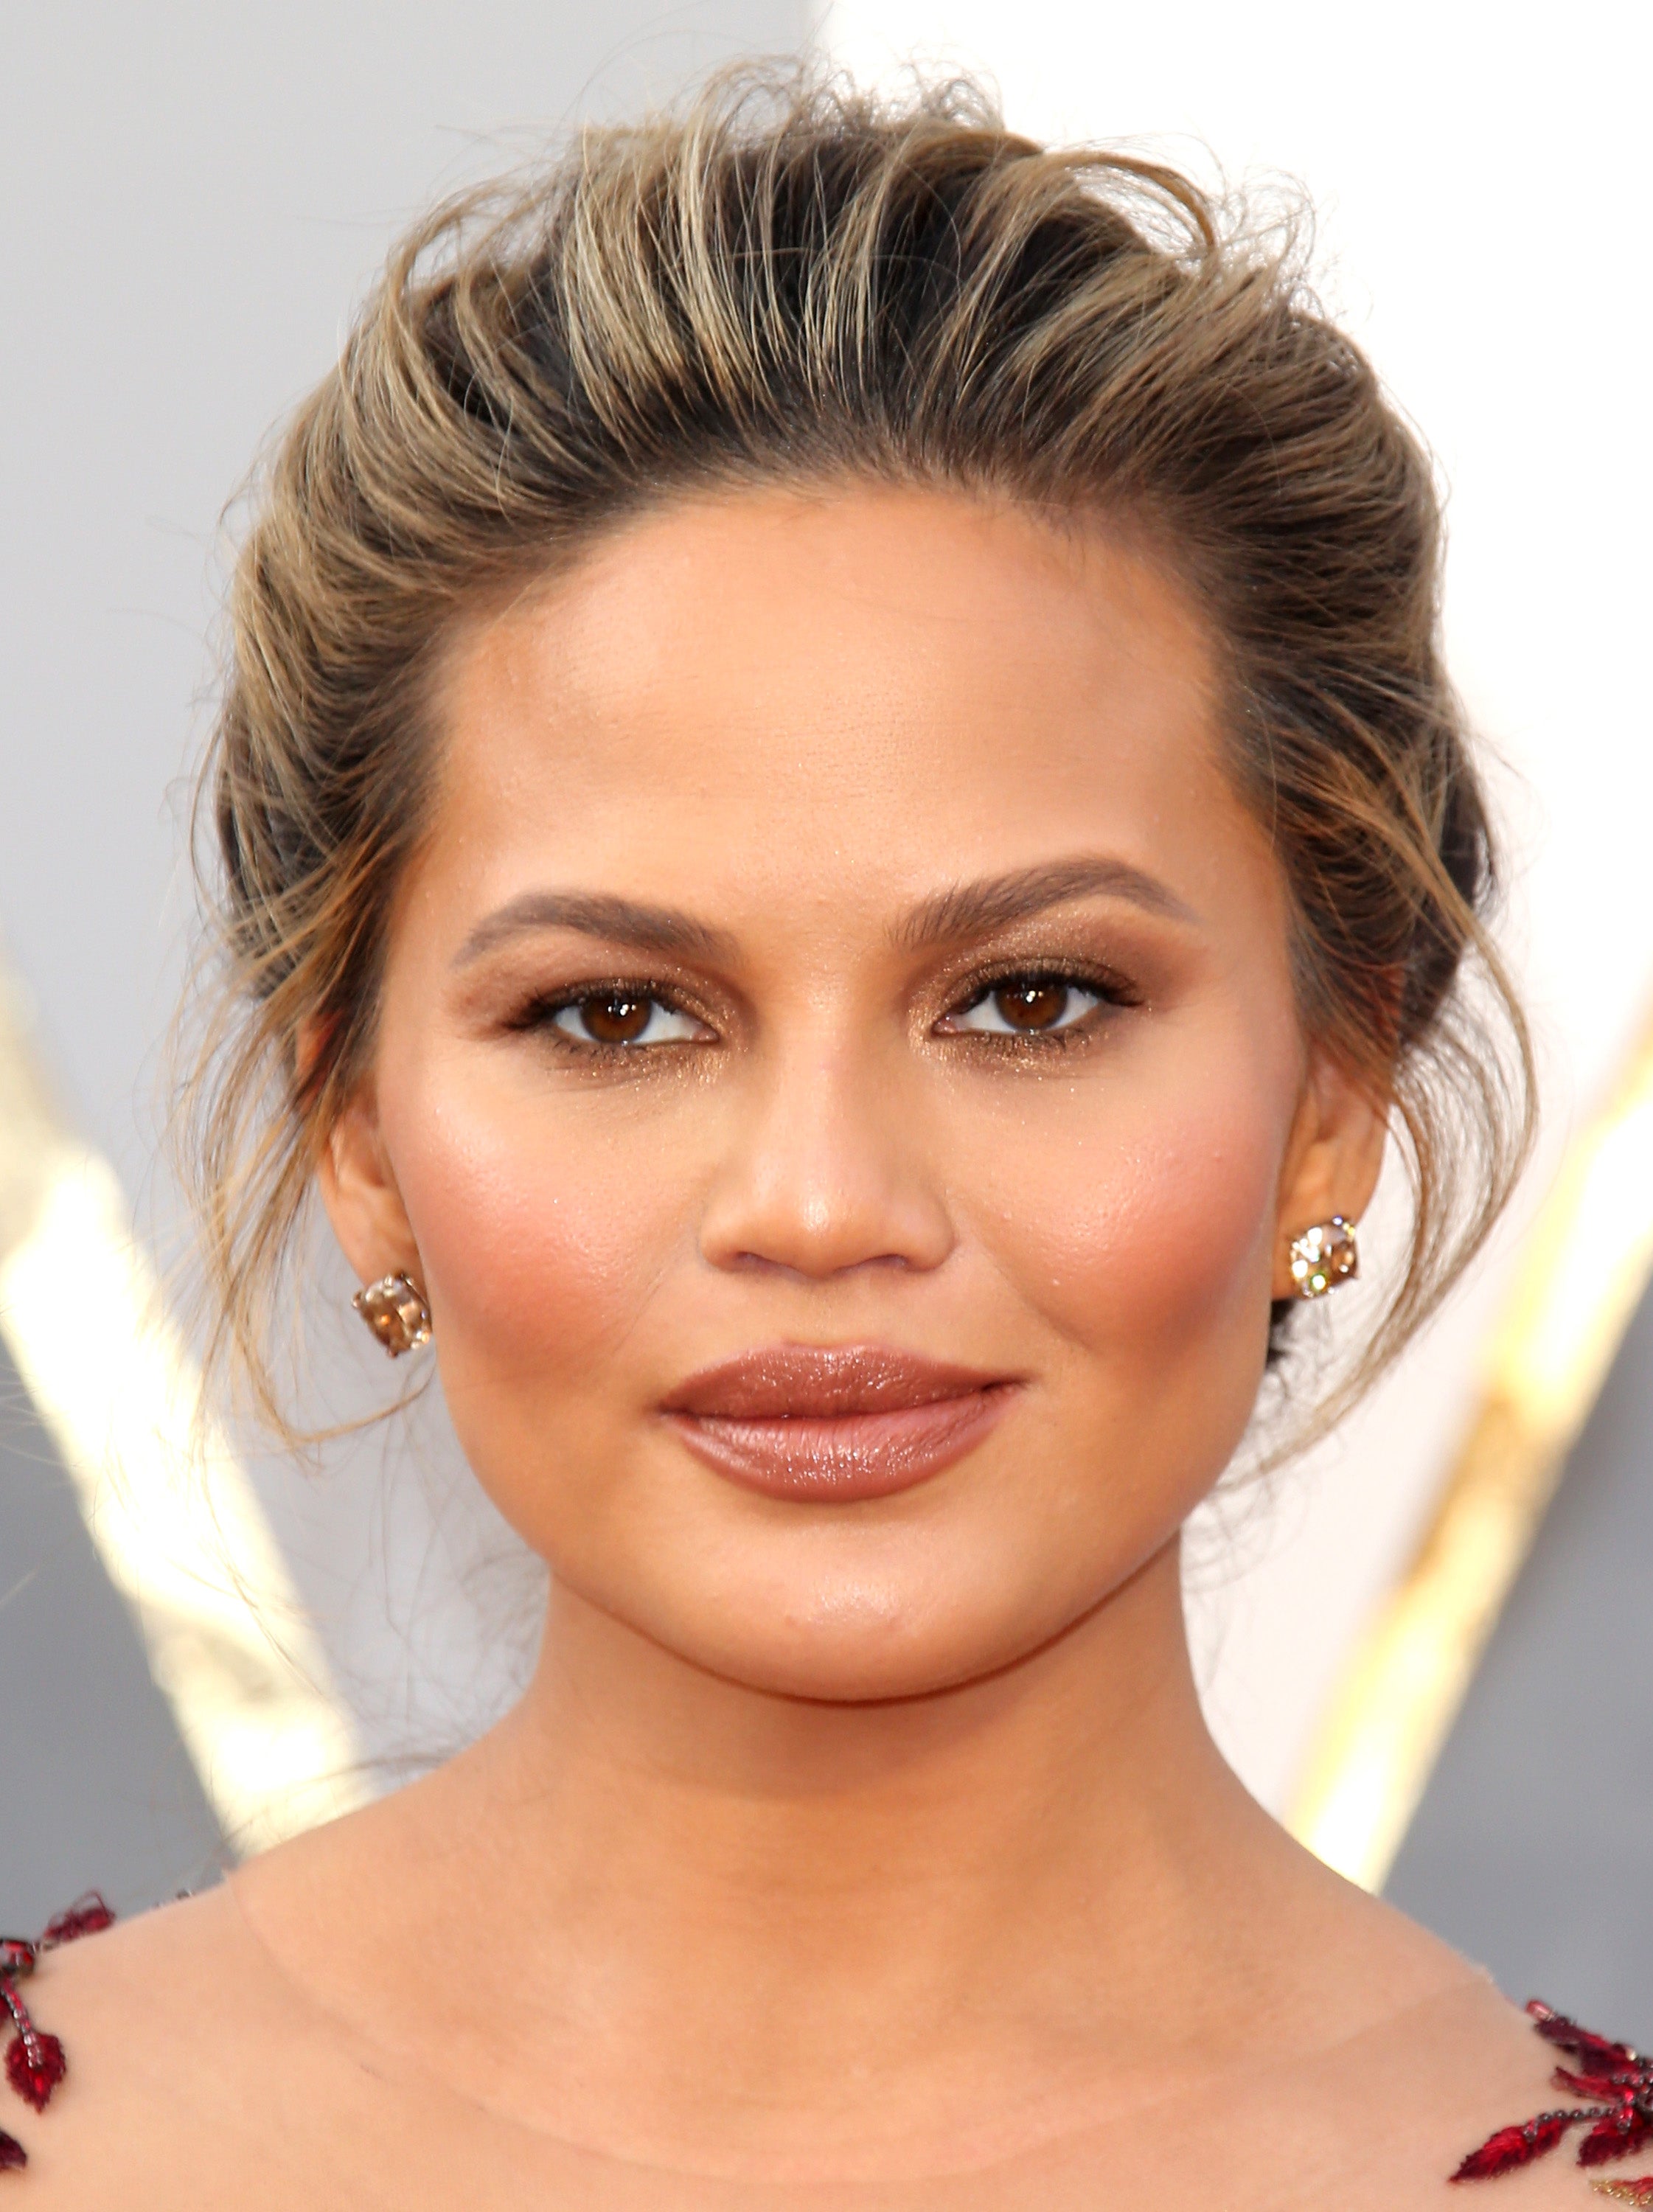 You Have To Try Chrissy Teigen’s Favorite Nail Polish